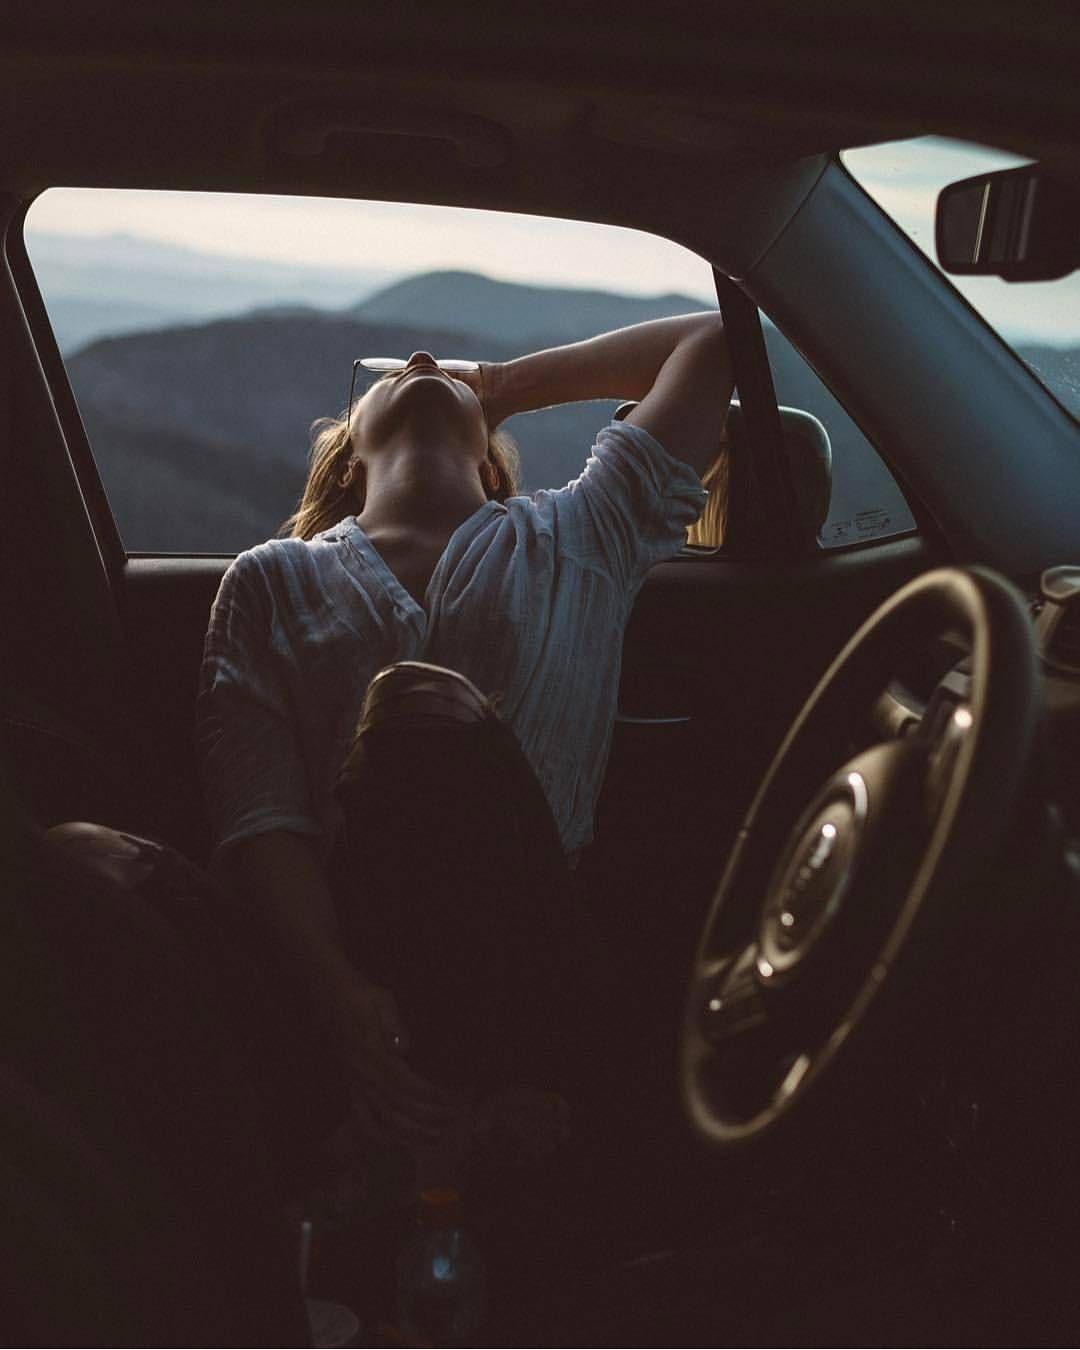 #moodyfilm  Feature Account on Instagram: “These road trip vibes are killing me ? 〰️ ✴ Photo by @fabiooliveira . ✴ In frame @shainabostin . ✴ Valid tag #moodyfilm #moodyfilmtakeover”